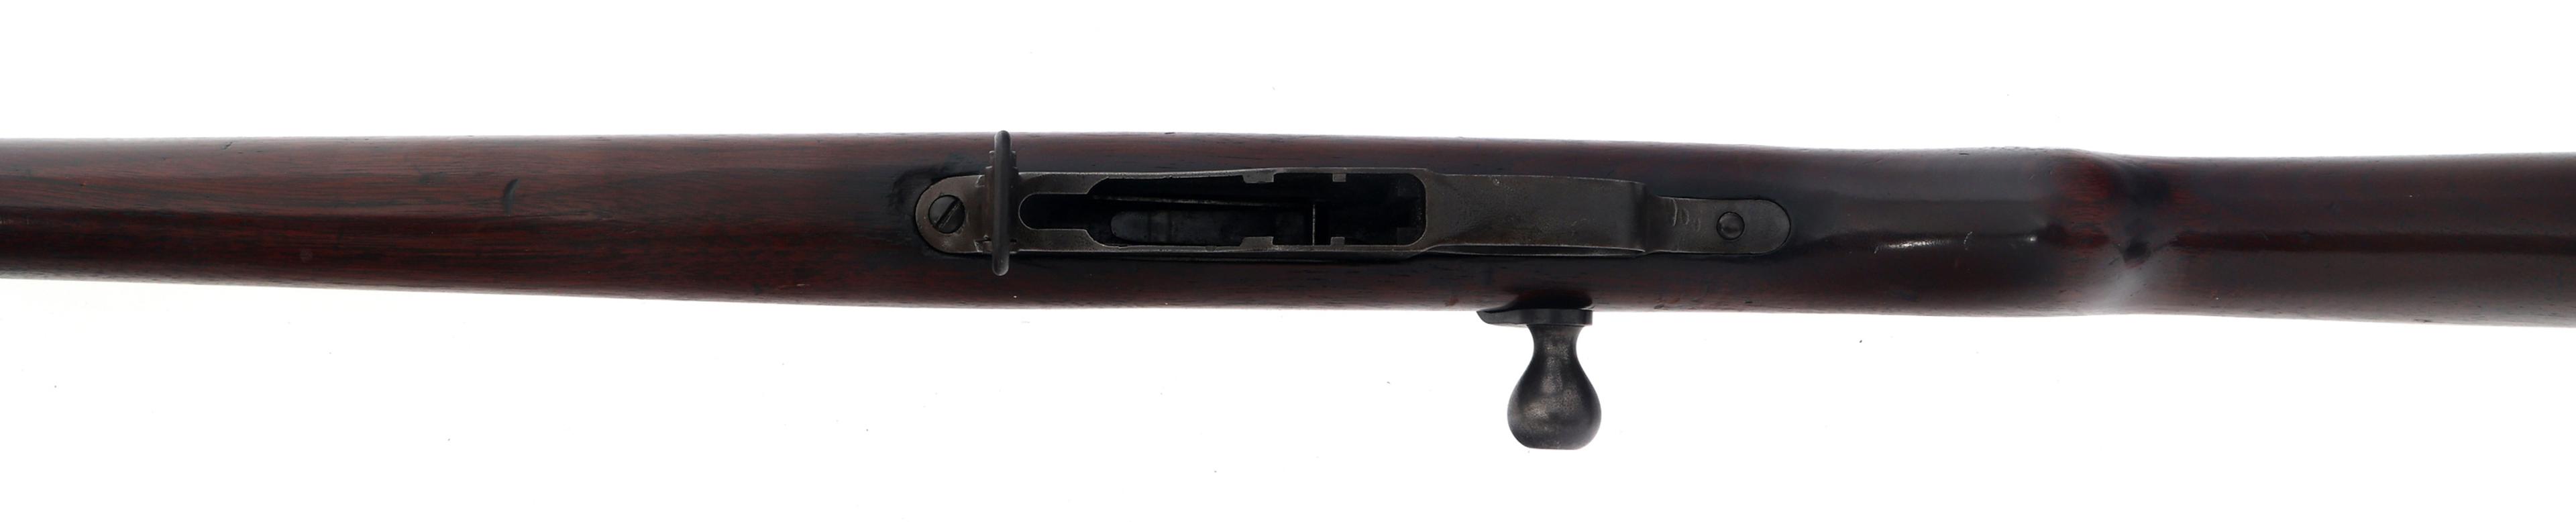 1897 US WINCHESTER MODEL 1895 LEE NAVY 6mm RIFLE